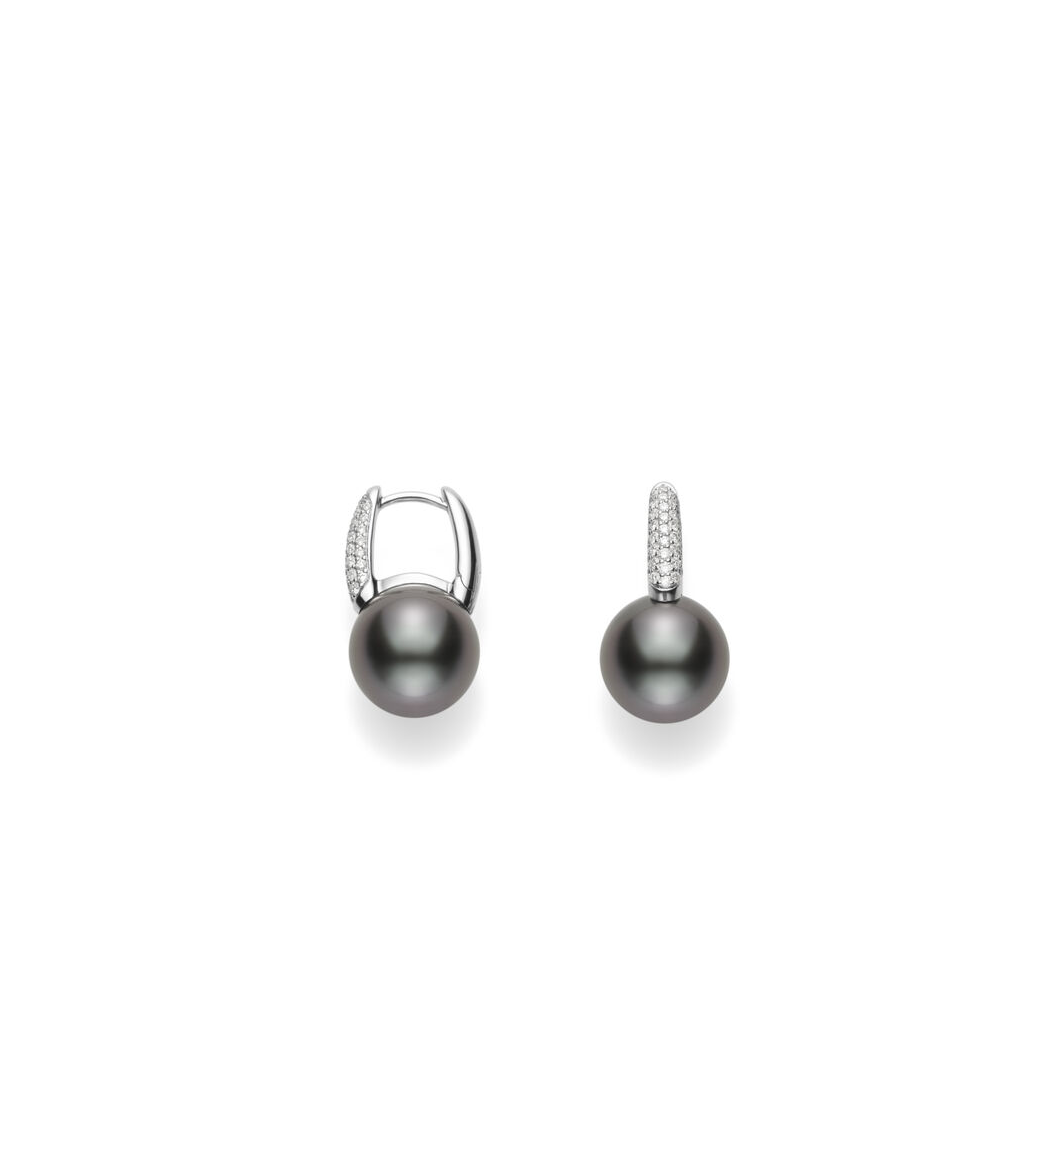 Mikimoto Classic White Gold Black South Sea Pearl and Drop Earrings with Diamonds